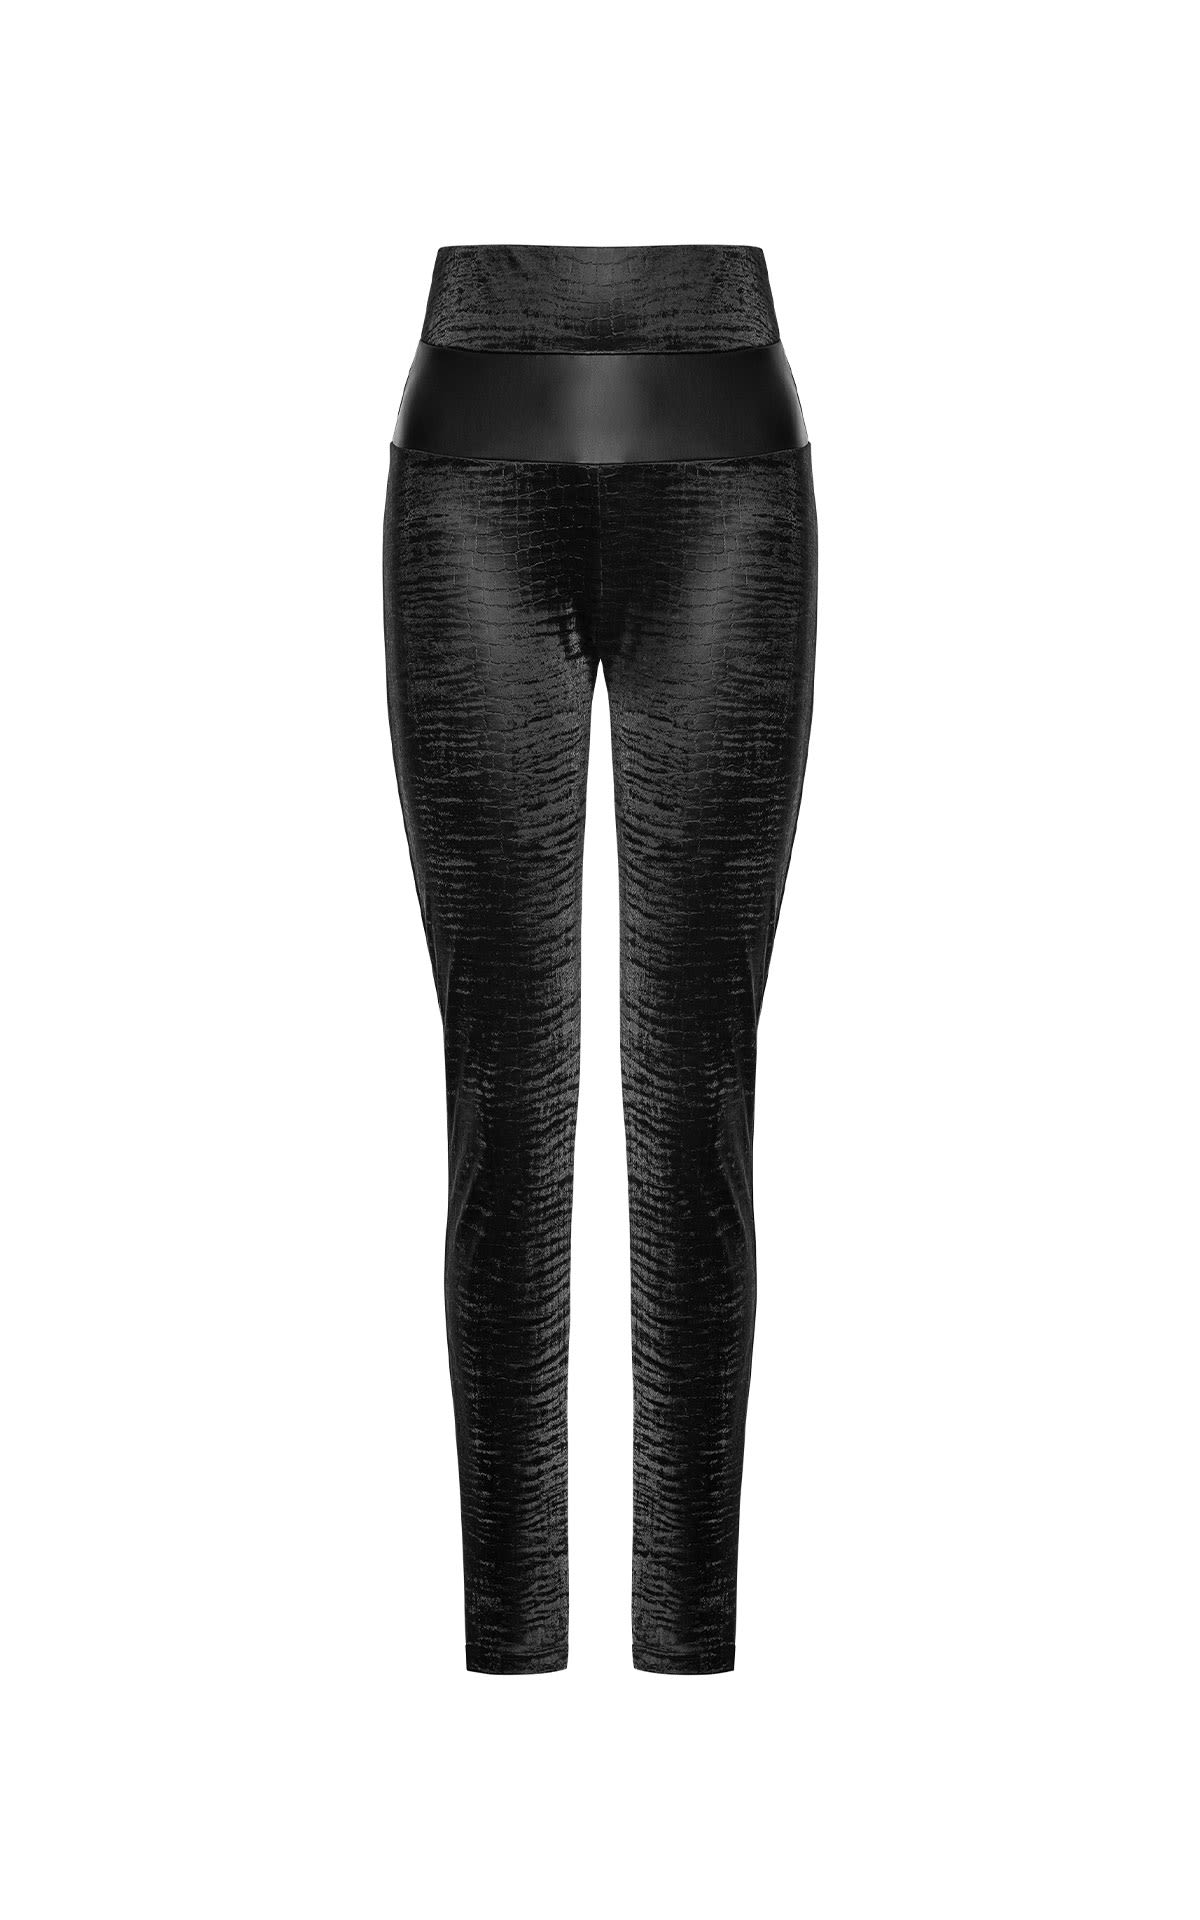 Wolford Croco leggings from Bicester Village